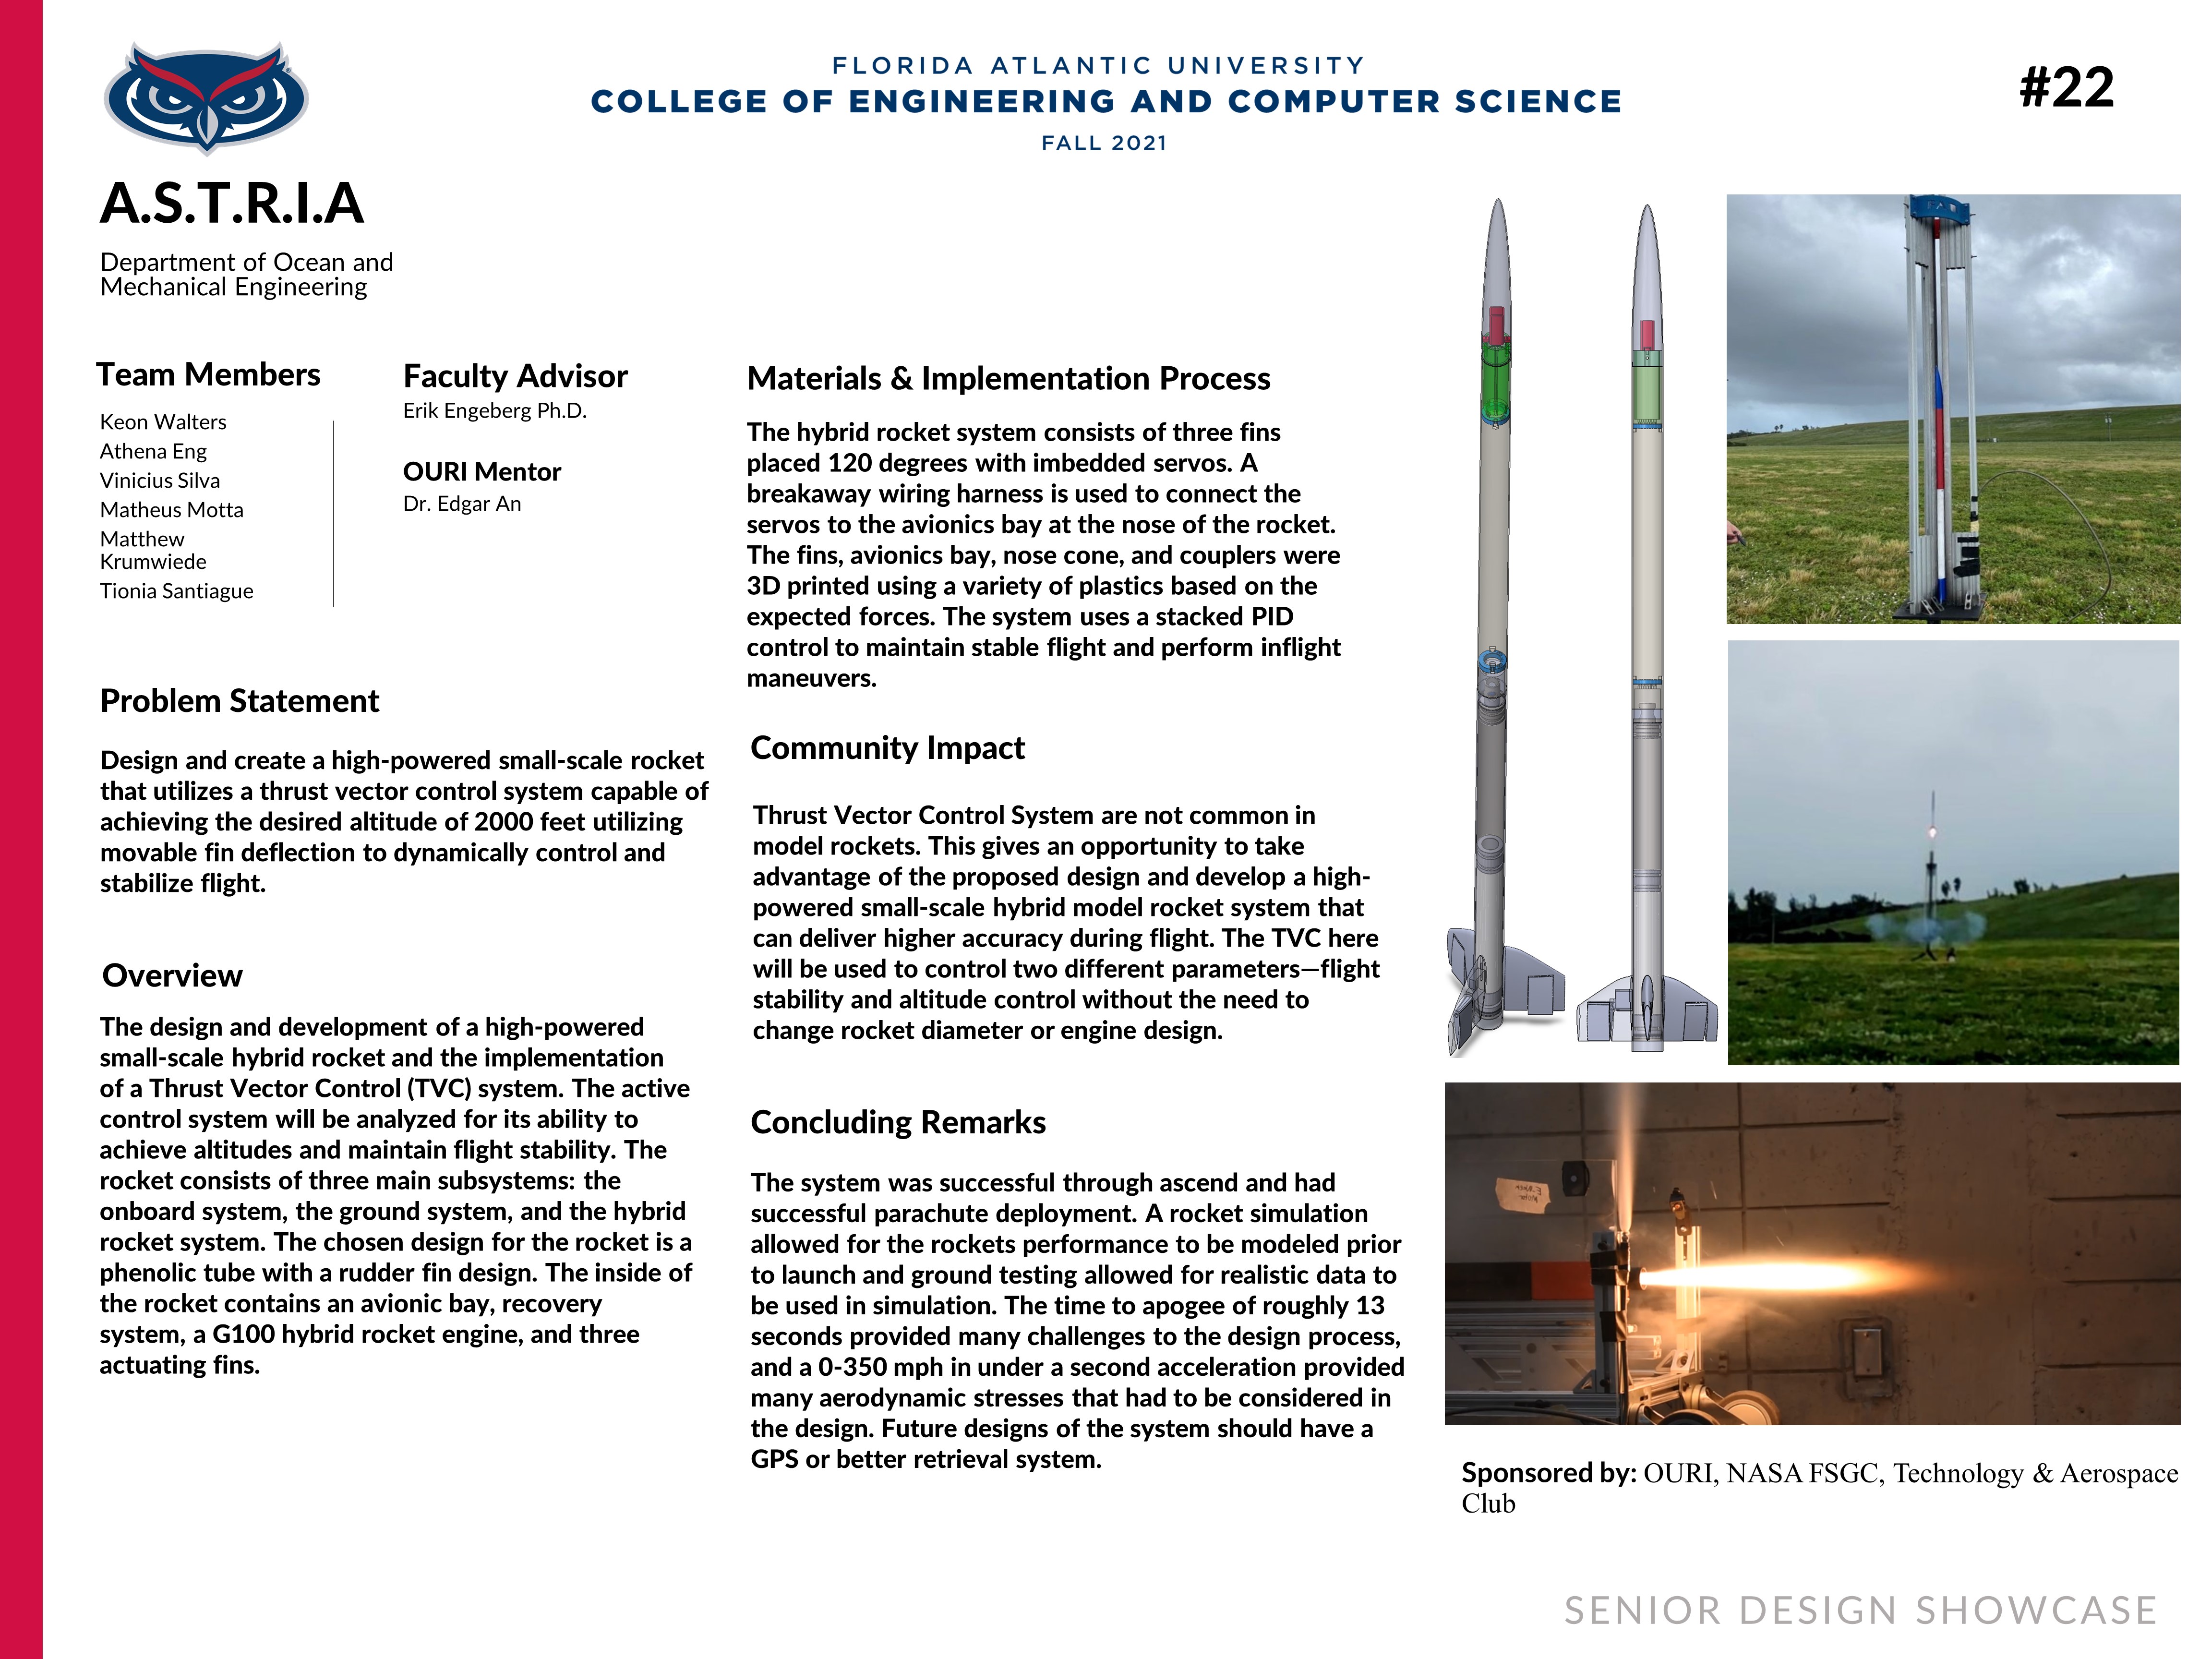 Automatic System for Targeting Rockets Ideal Altitude (ASTRIA)